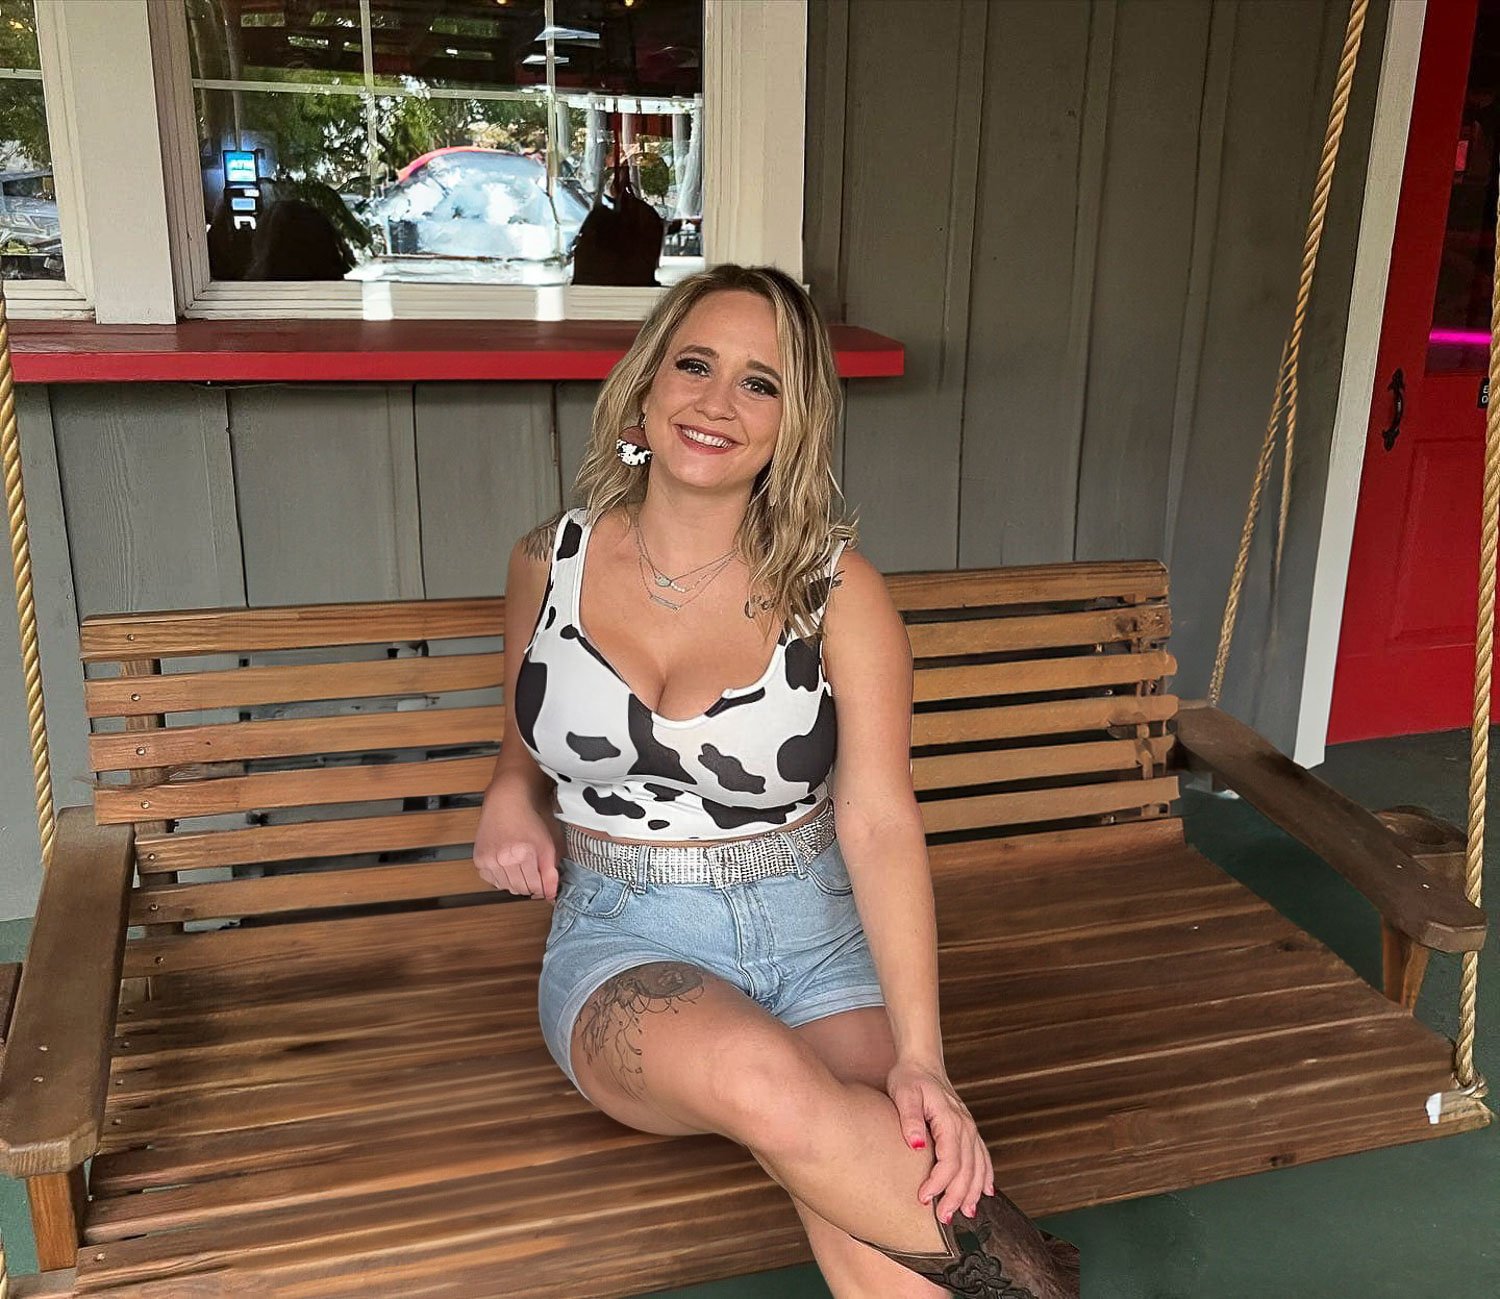 A blonde woman sitting on a wooden bench smiling at camera